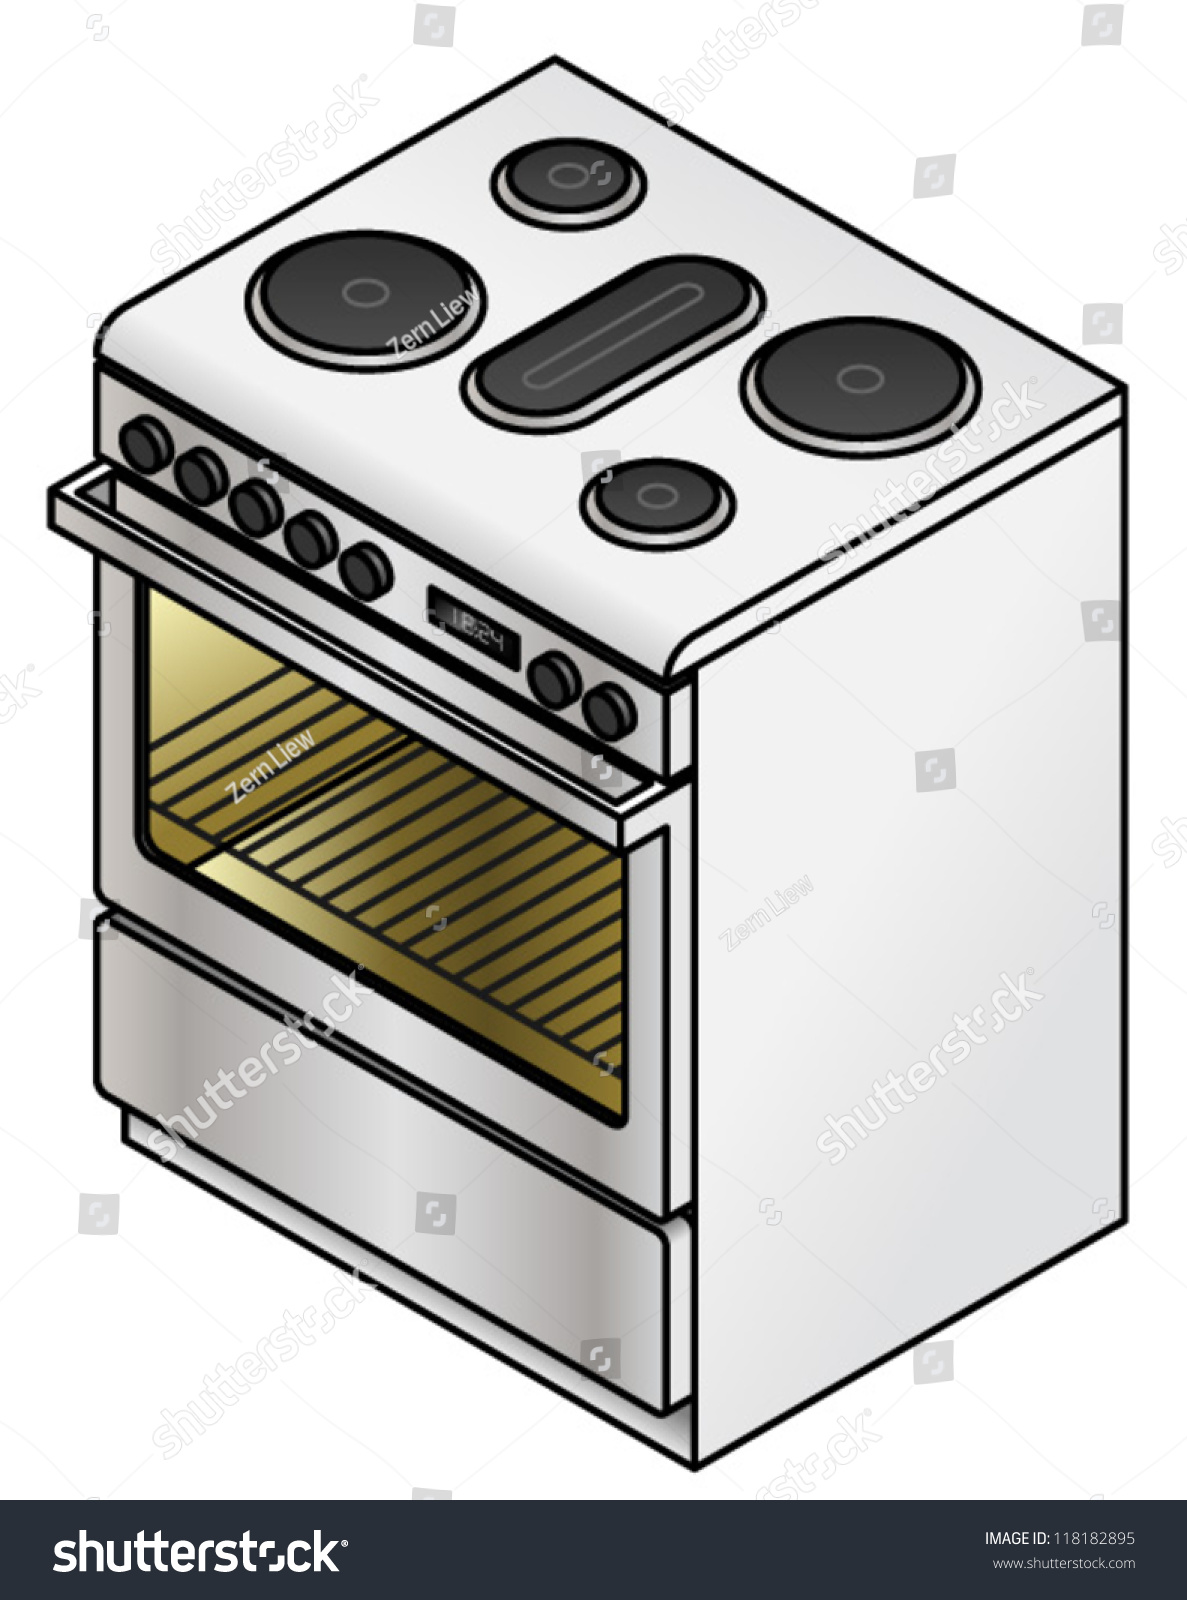 clipart of oven - photo #31